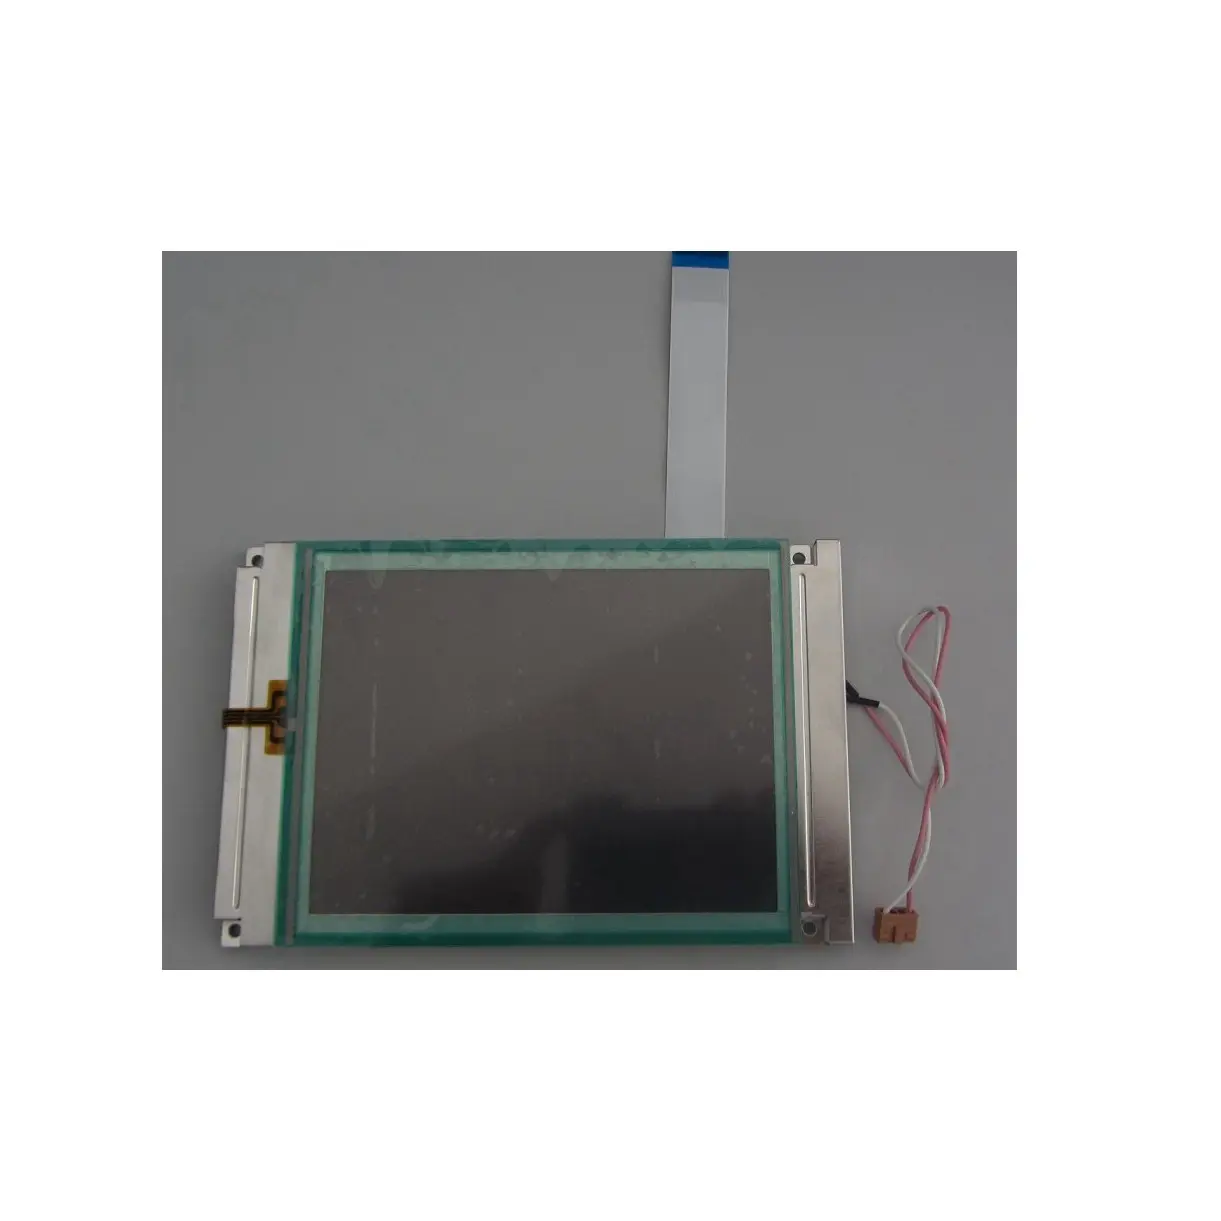 new SX14Q004-ZZA lcd screen in stock for industrial use